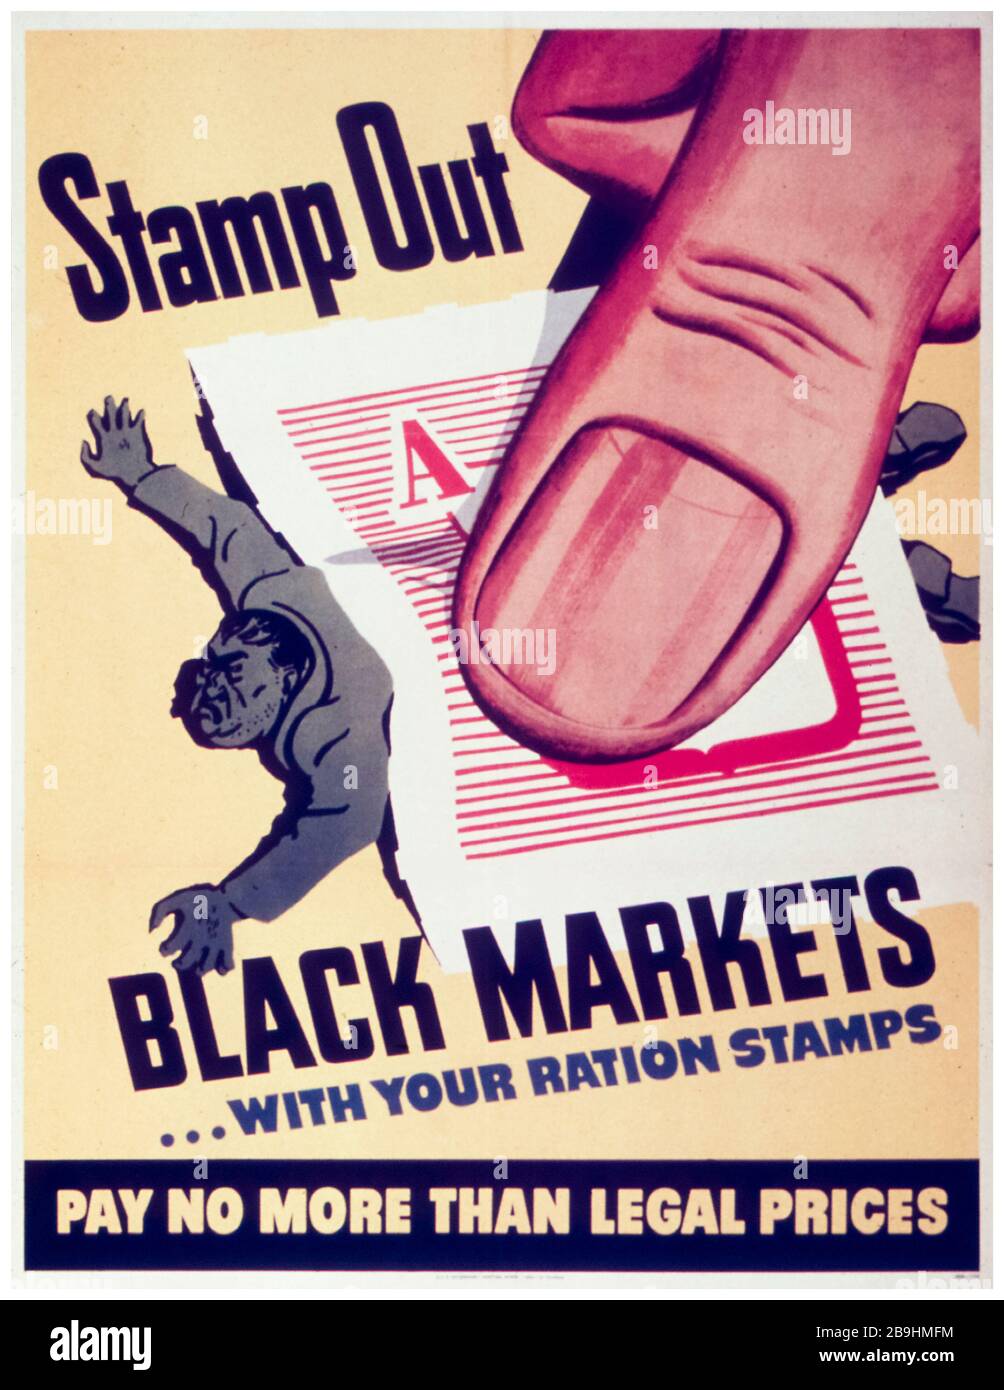 US WW2 Food rationing, Stamp out black markets with your ration stamps, profiteering poster, 1941-1945 Stock Photo